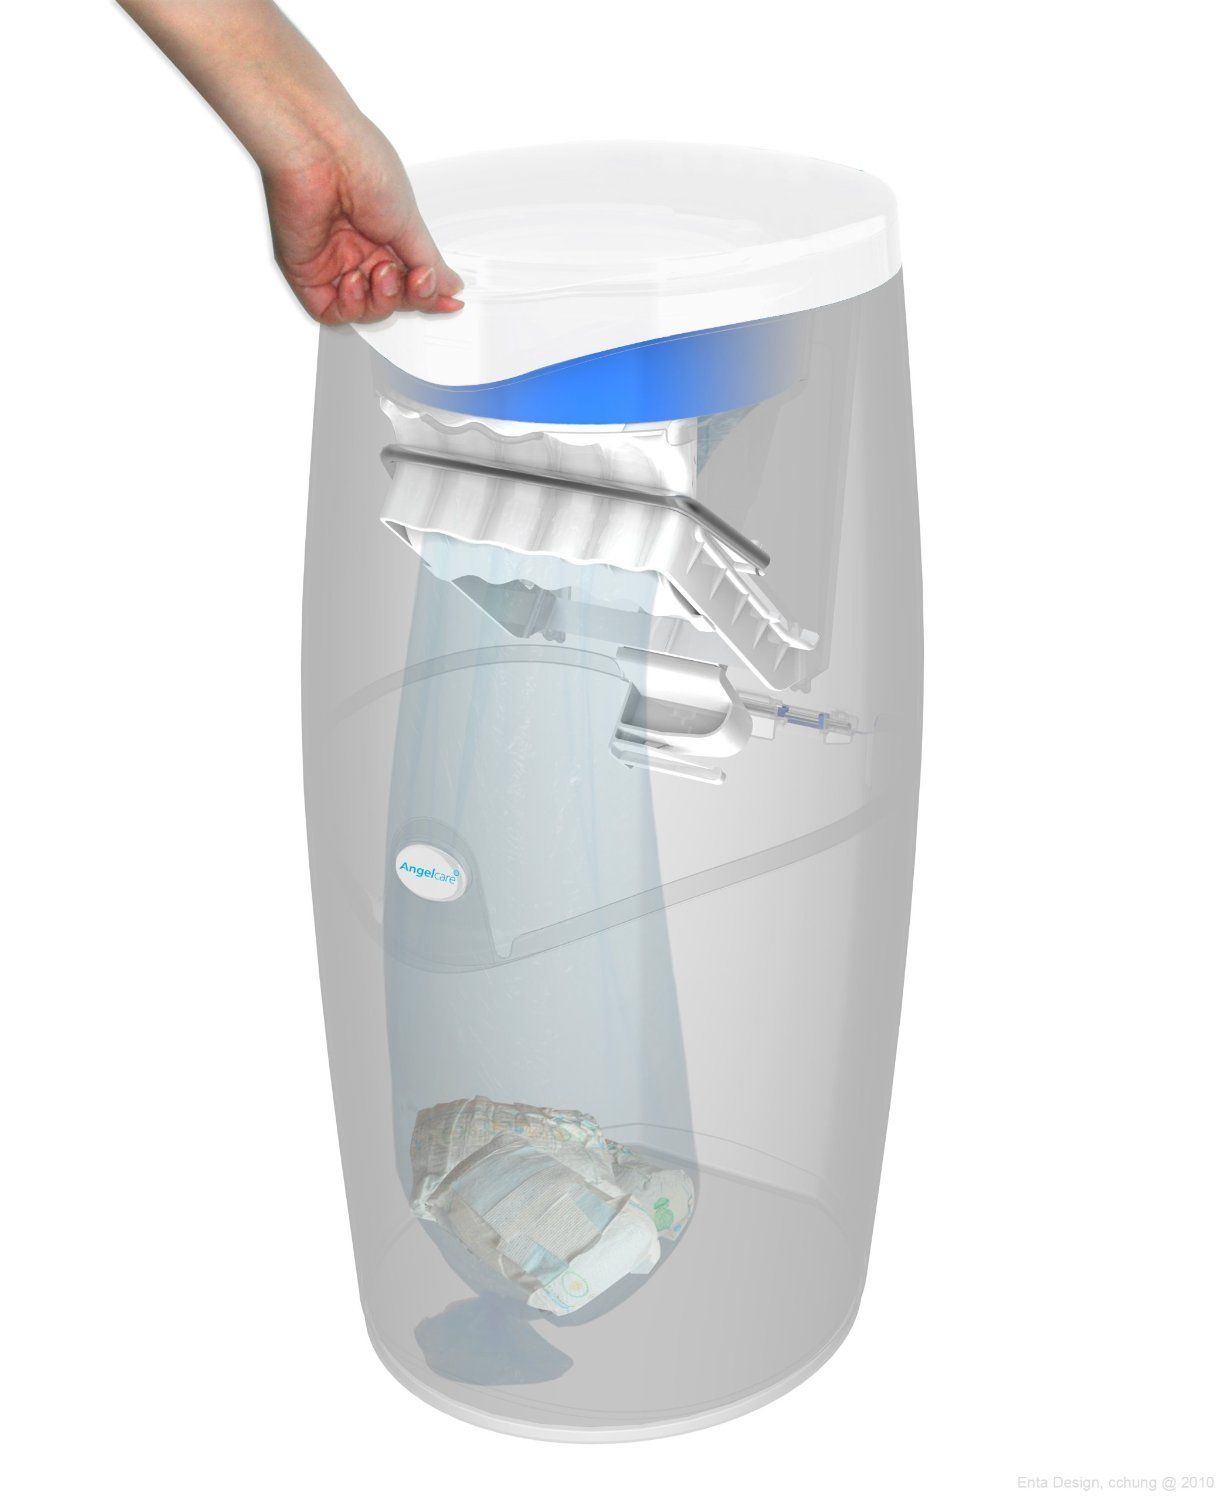 angelcare nappy disposal system manual